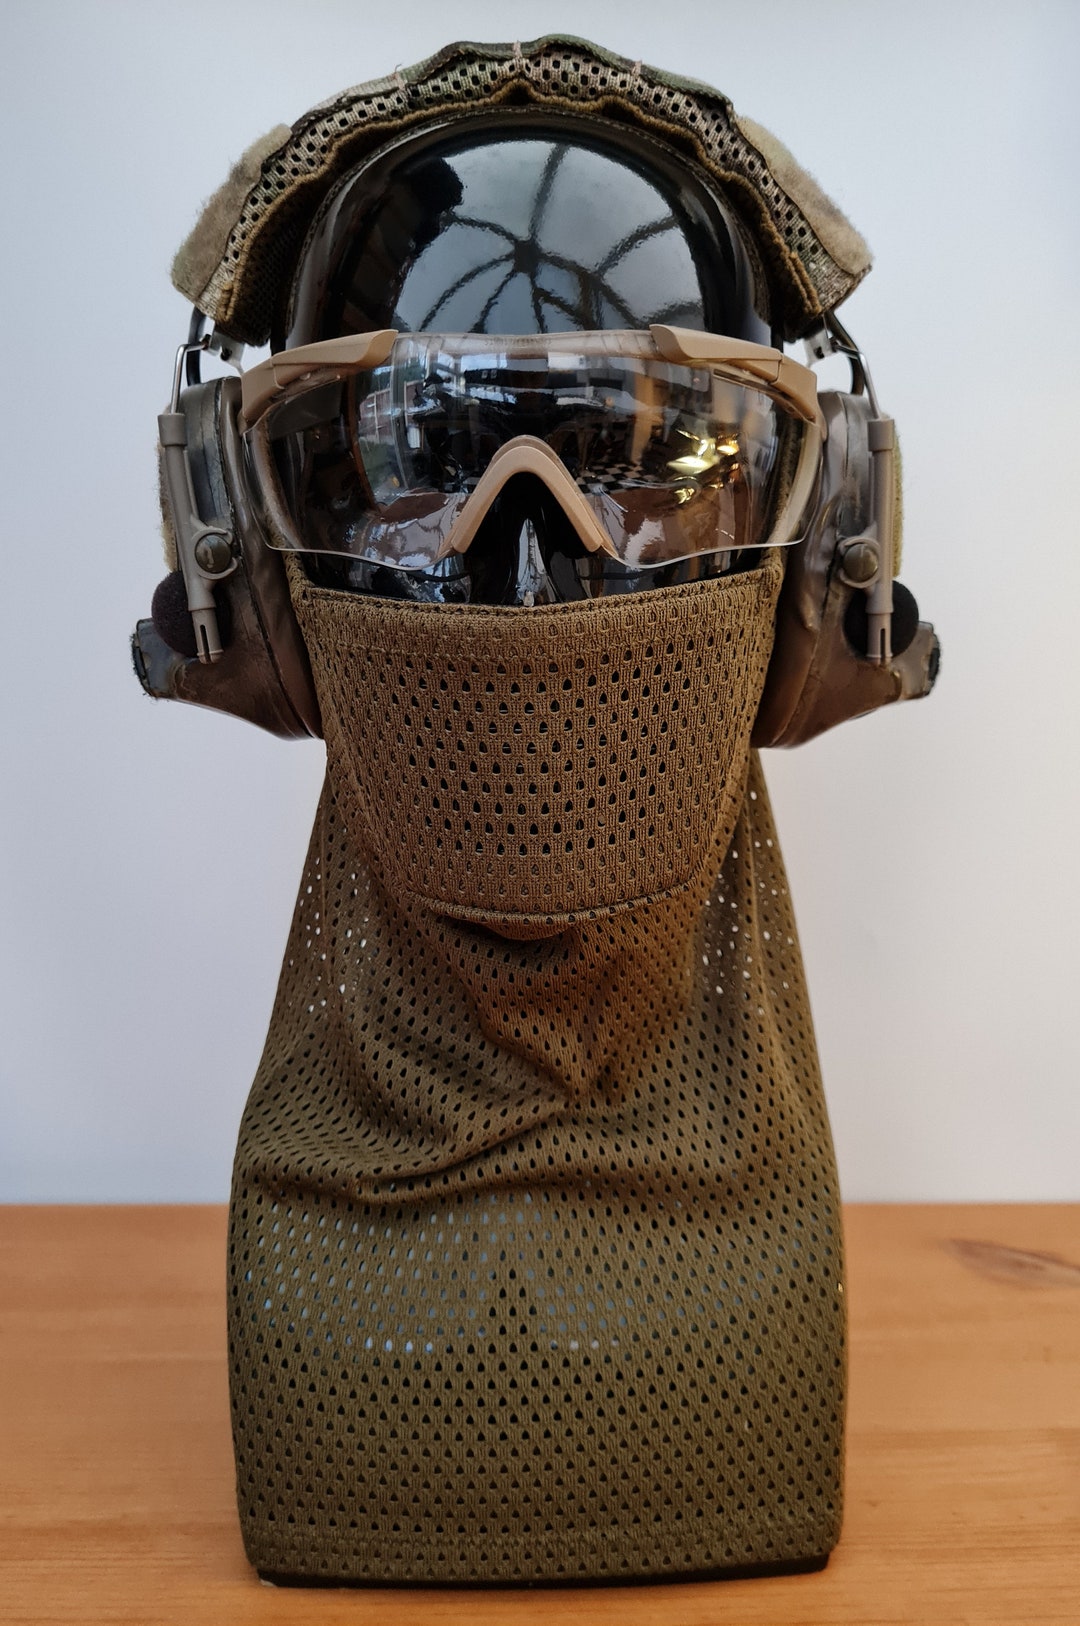 Custom Airsoft Face Protection